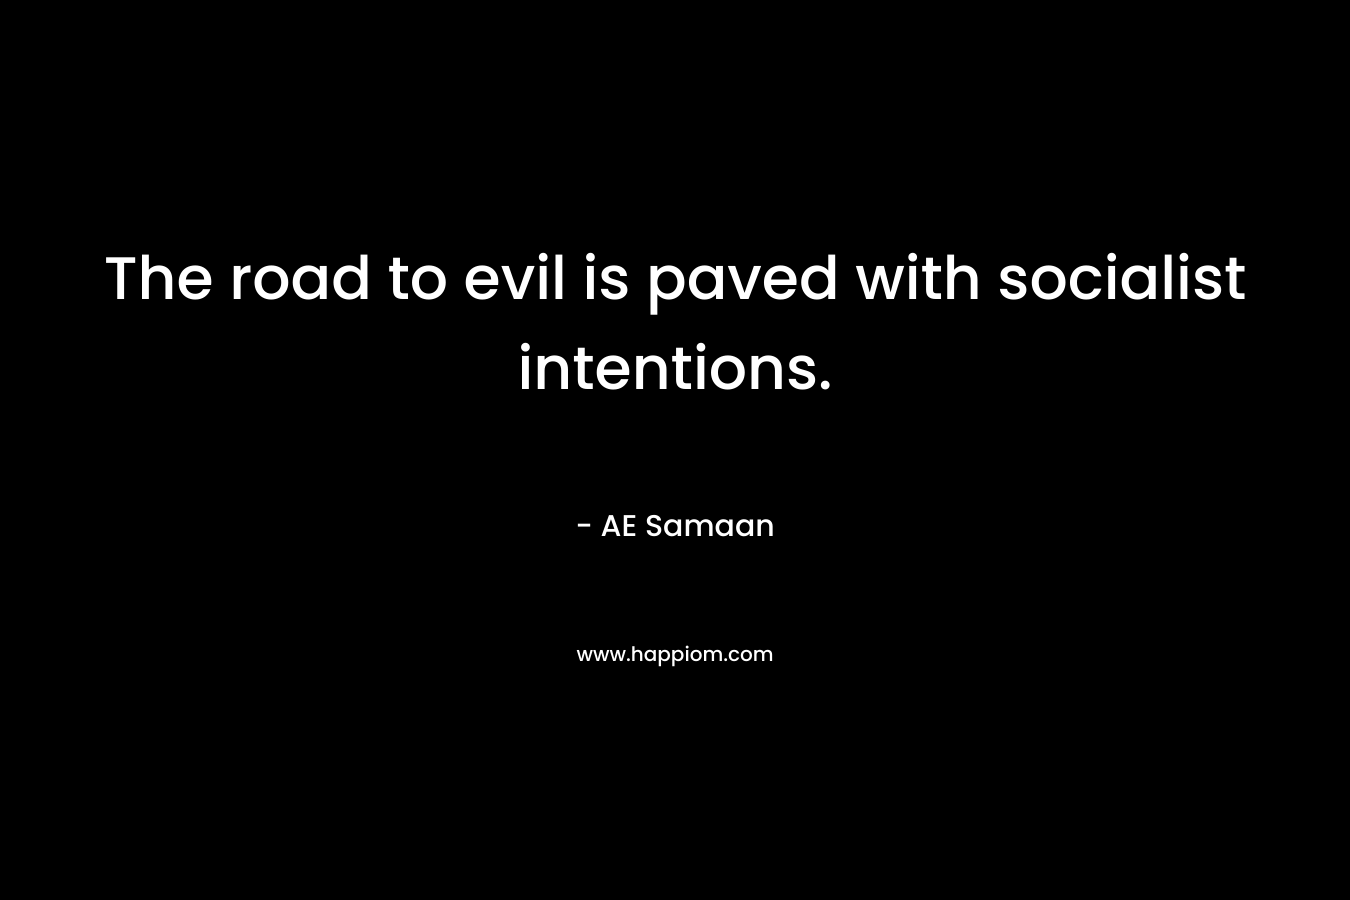 The road to evil is paved with socialist intentions.